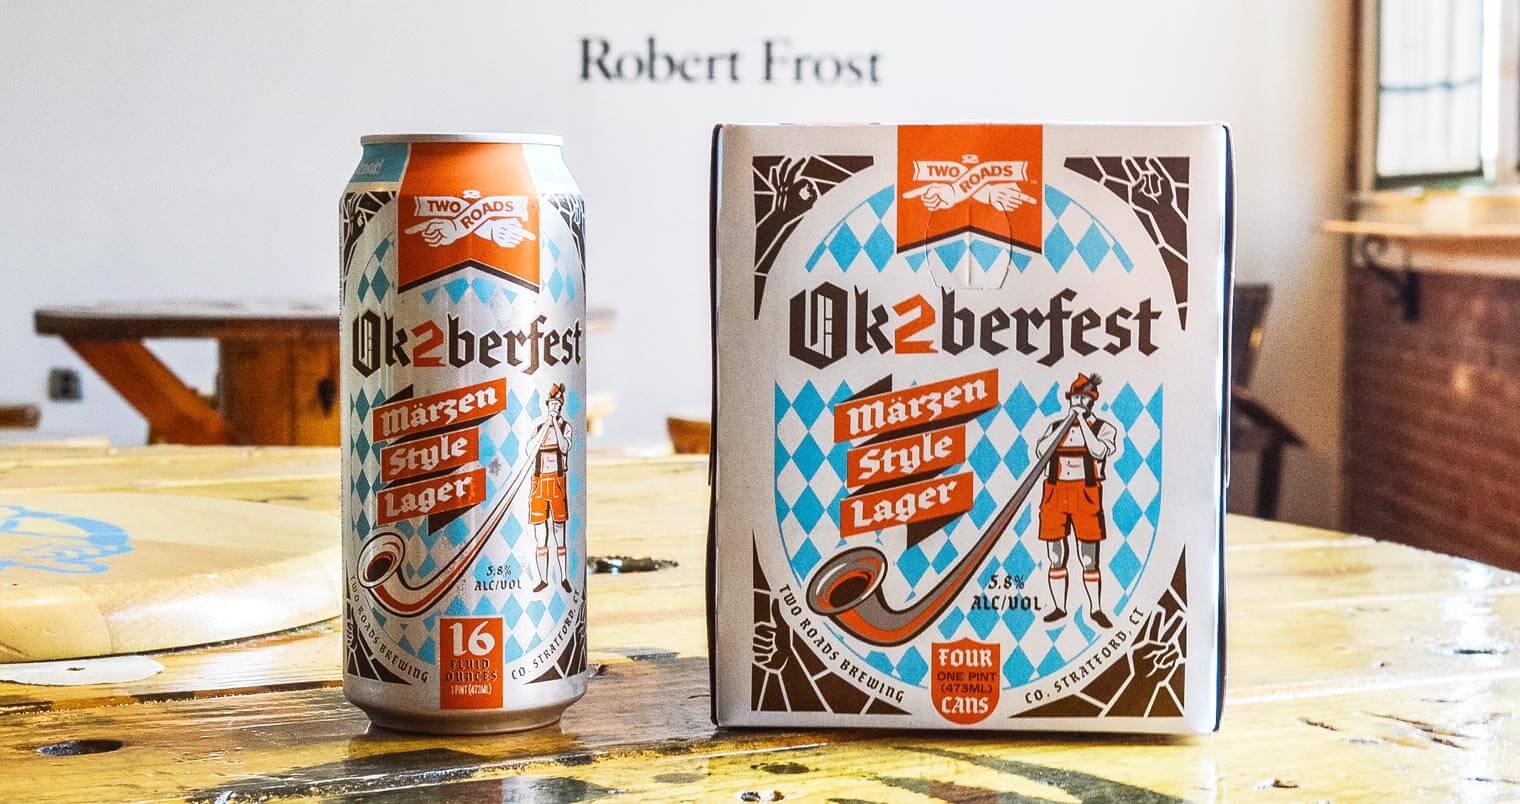 Two Roads Ok2berfest Marzen Now Available in Cans, featured image